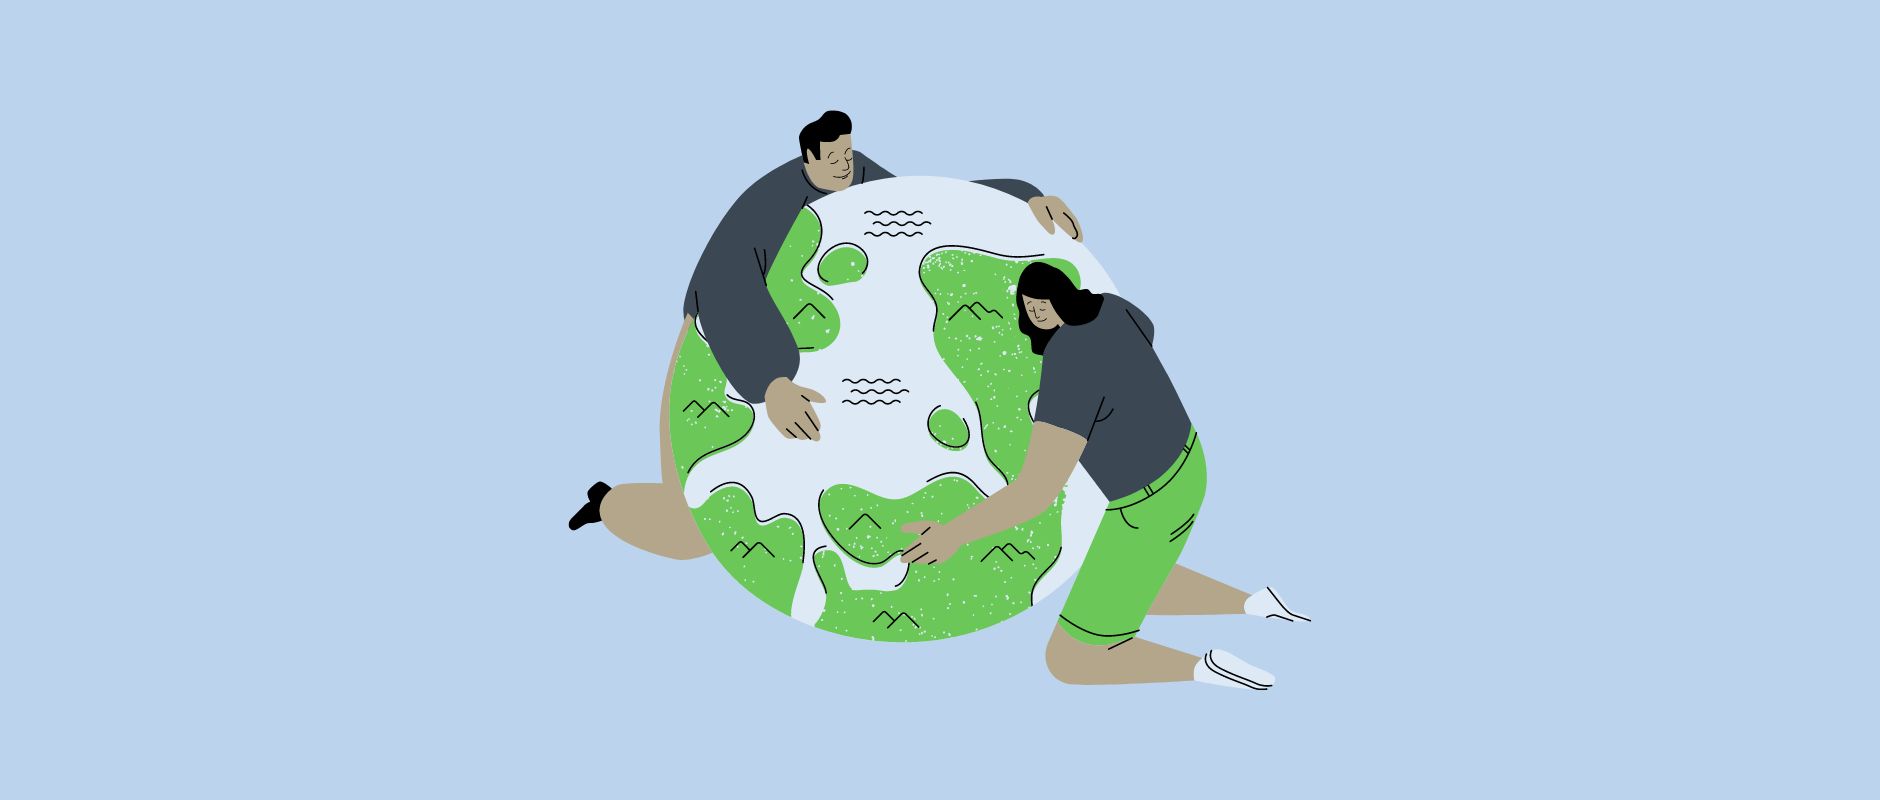 A website banner for a blog post about Earth Day. The image features an illustration of two large humans hugging the planet earth. The colours are very eco-themed with blues, light browns, and greens.